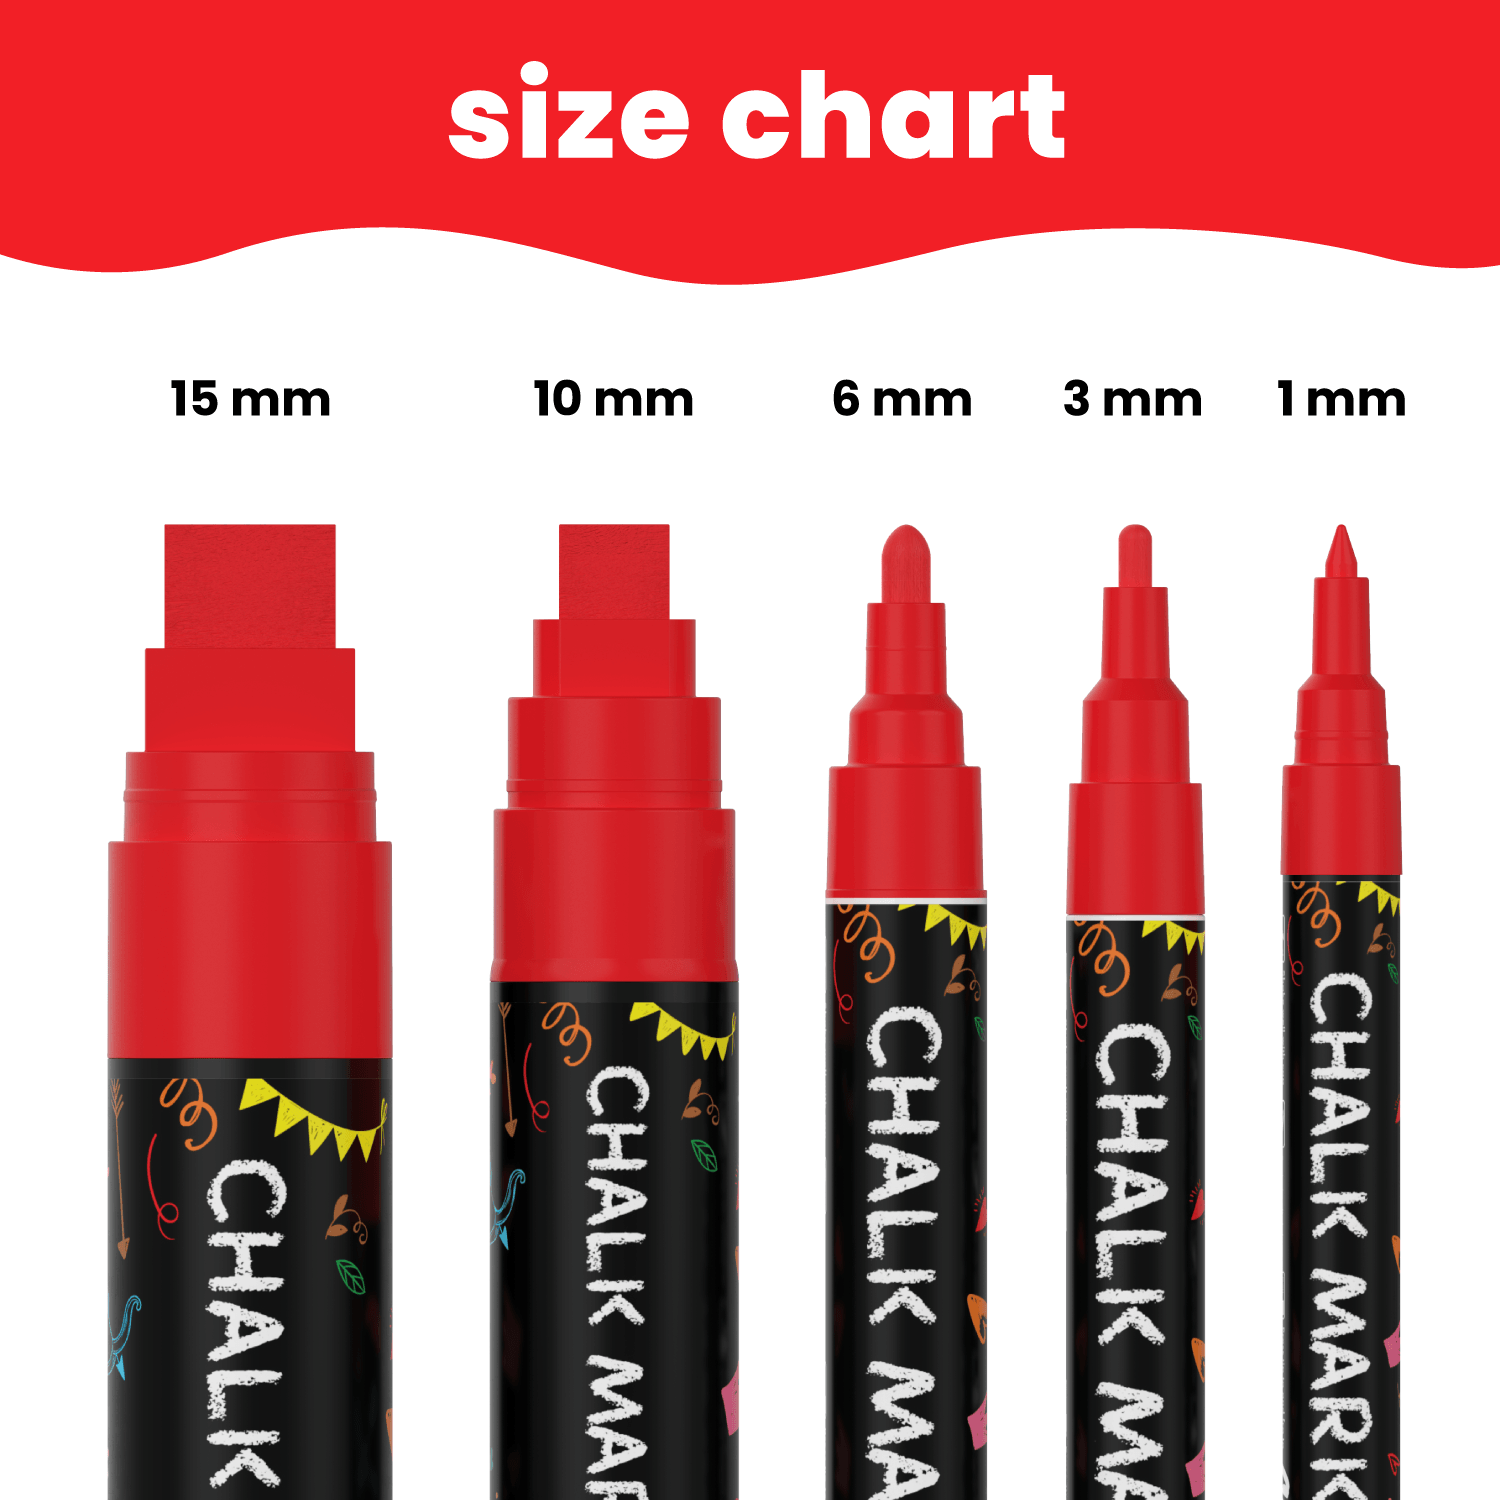 CHALKOLA chalk markers review - My First Go drawing on different